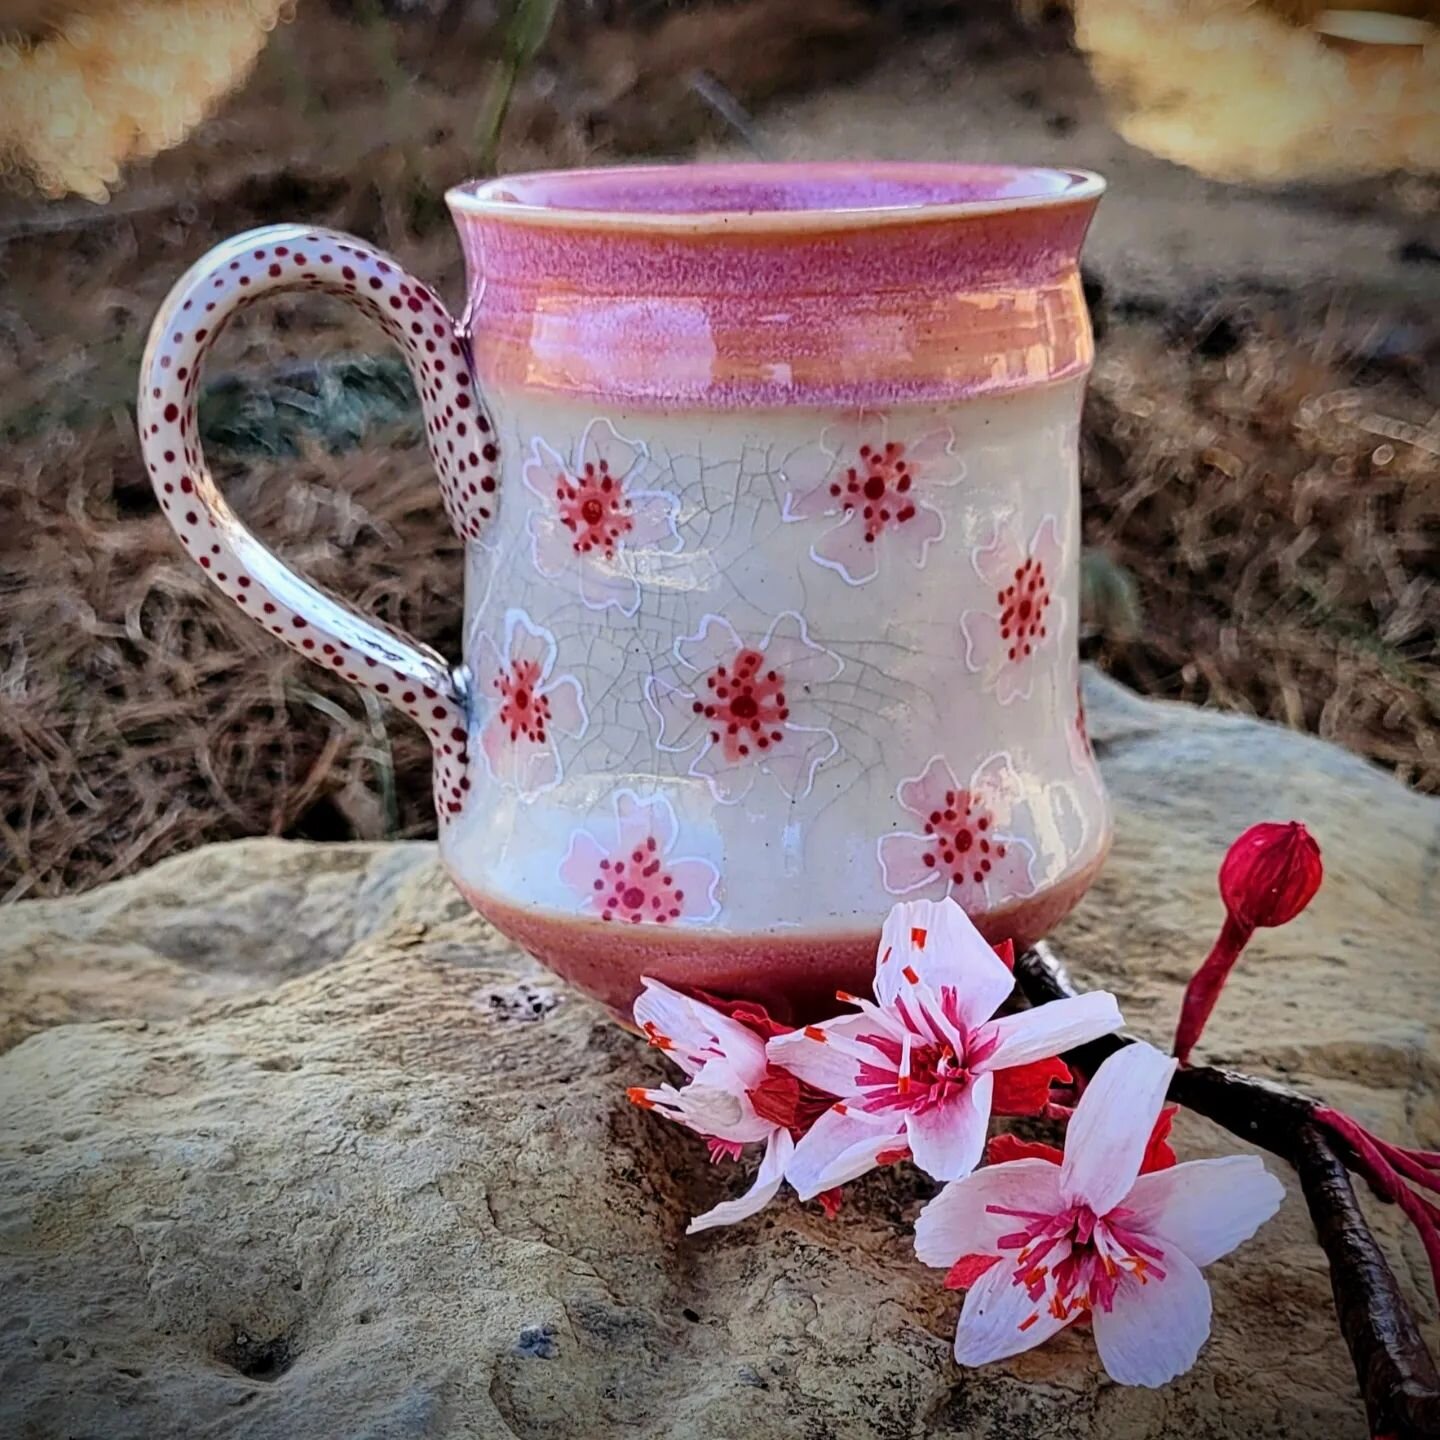 Happy #mugmonday! I&rsquo;m partnering with @sipsby to give one lucky winner this Cherry Blossom Mug and a free Sips by Box.

Sipsby is a personalized tea subscription box that makes discovering tea fun, personalized, and affordable, matching tea lov